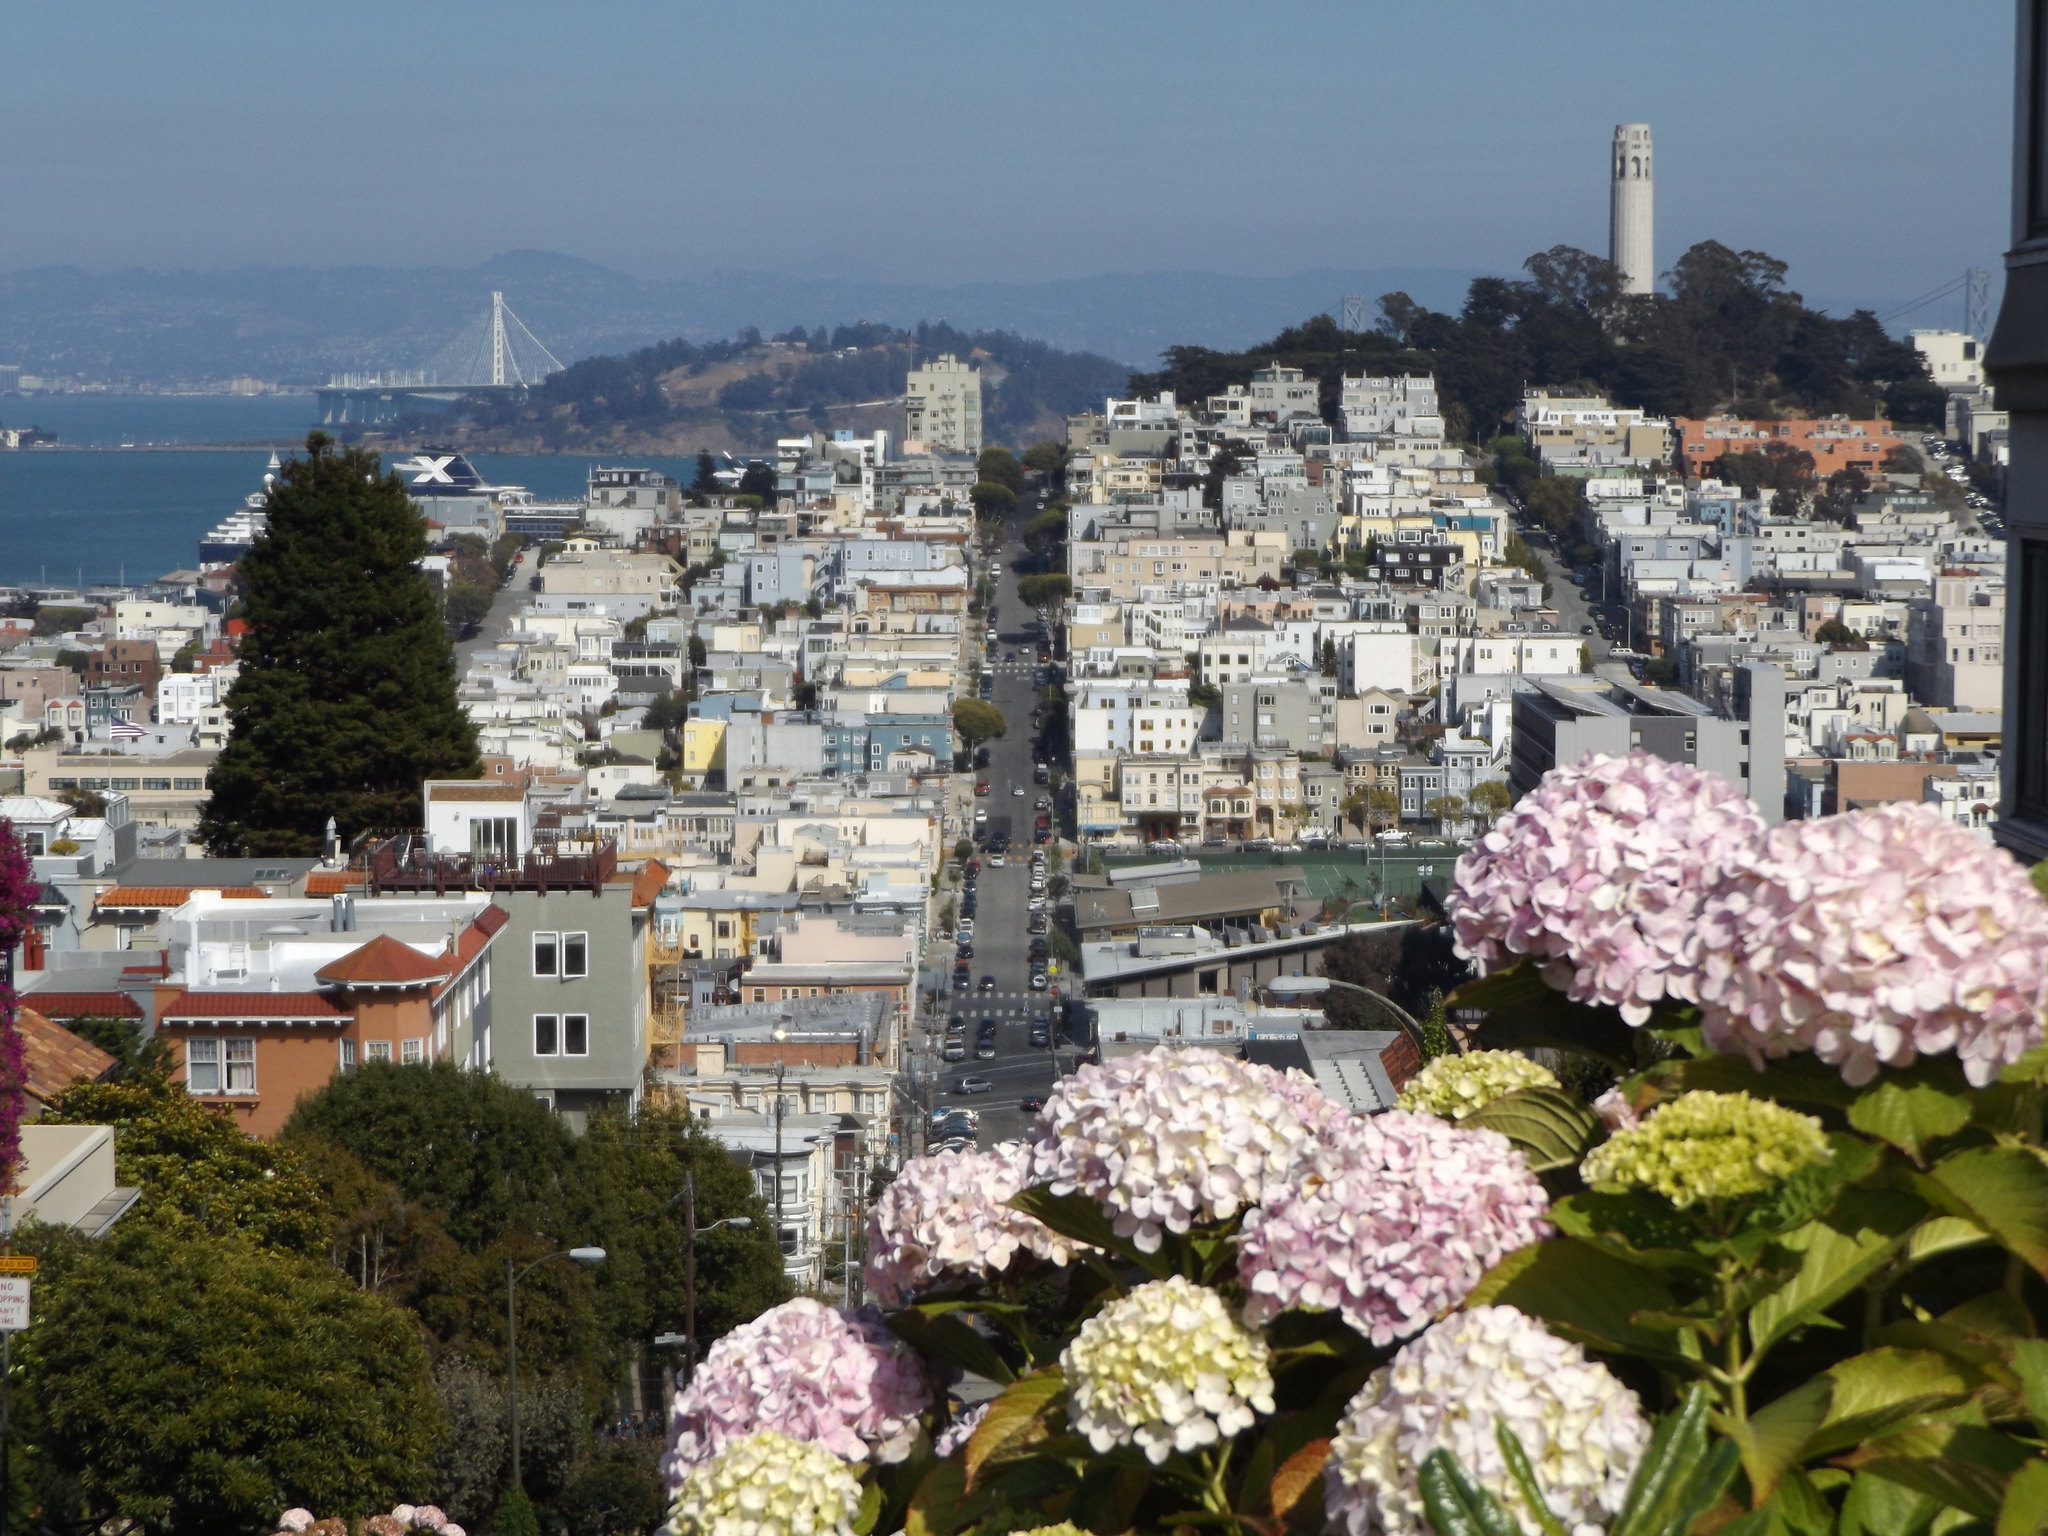 Telegraph Hill from the Top of Lombard Street, San Francisco, California, USA, 6 September 2018